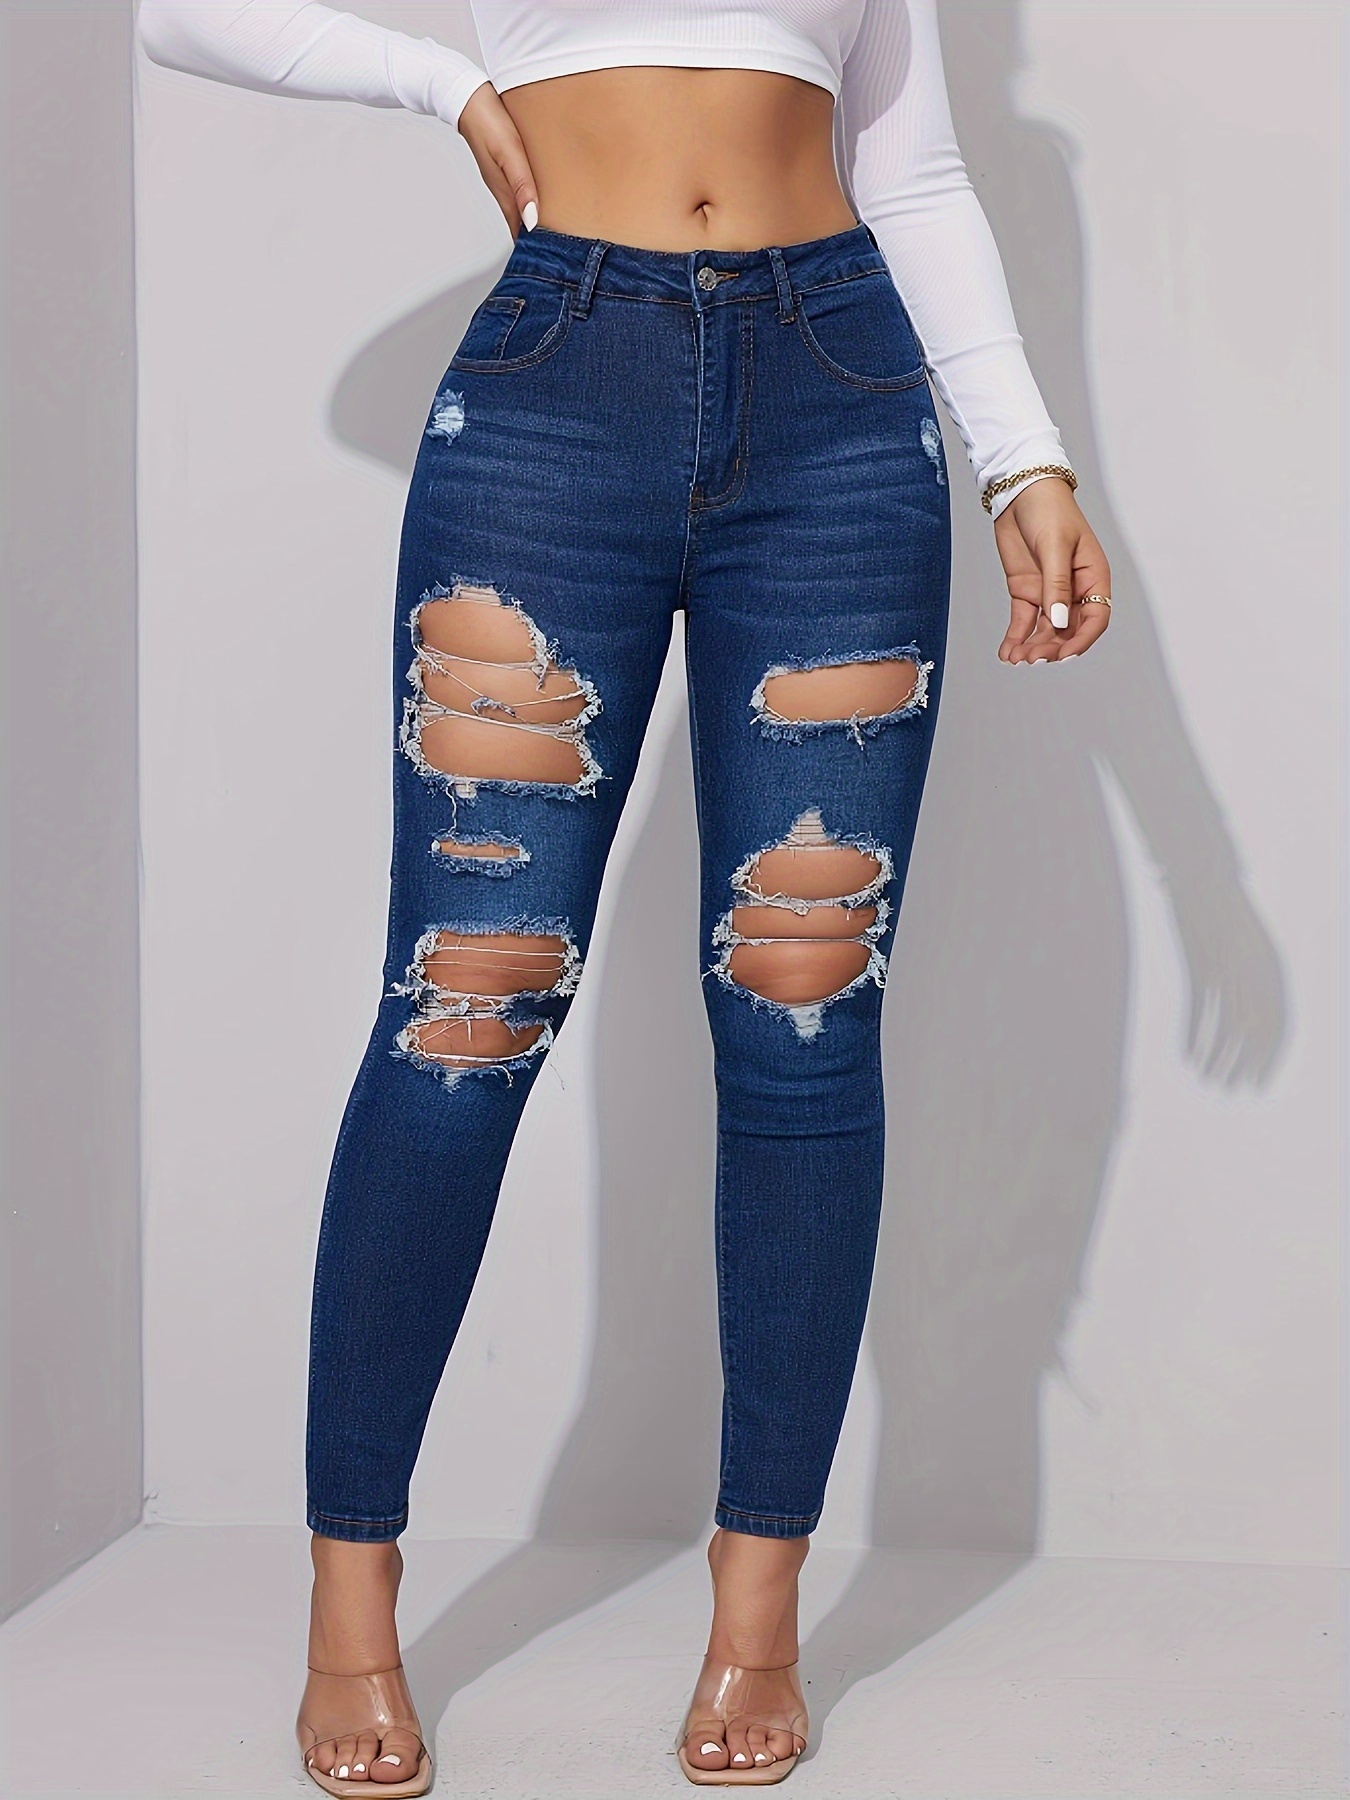 Plain Ripped Holes Skinny Jeans, Slim Fit Distressed Slight Stretch Ankle  Length Jeans, Women's Denim Jeans & Clothing